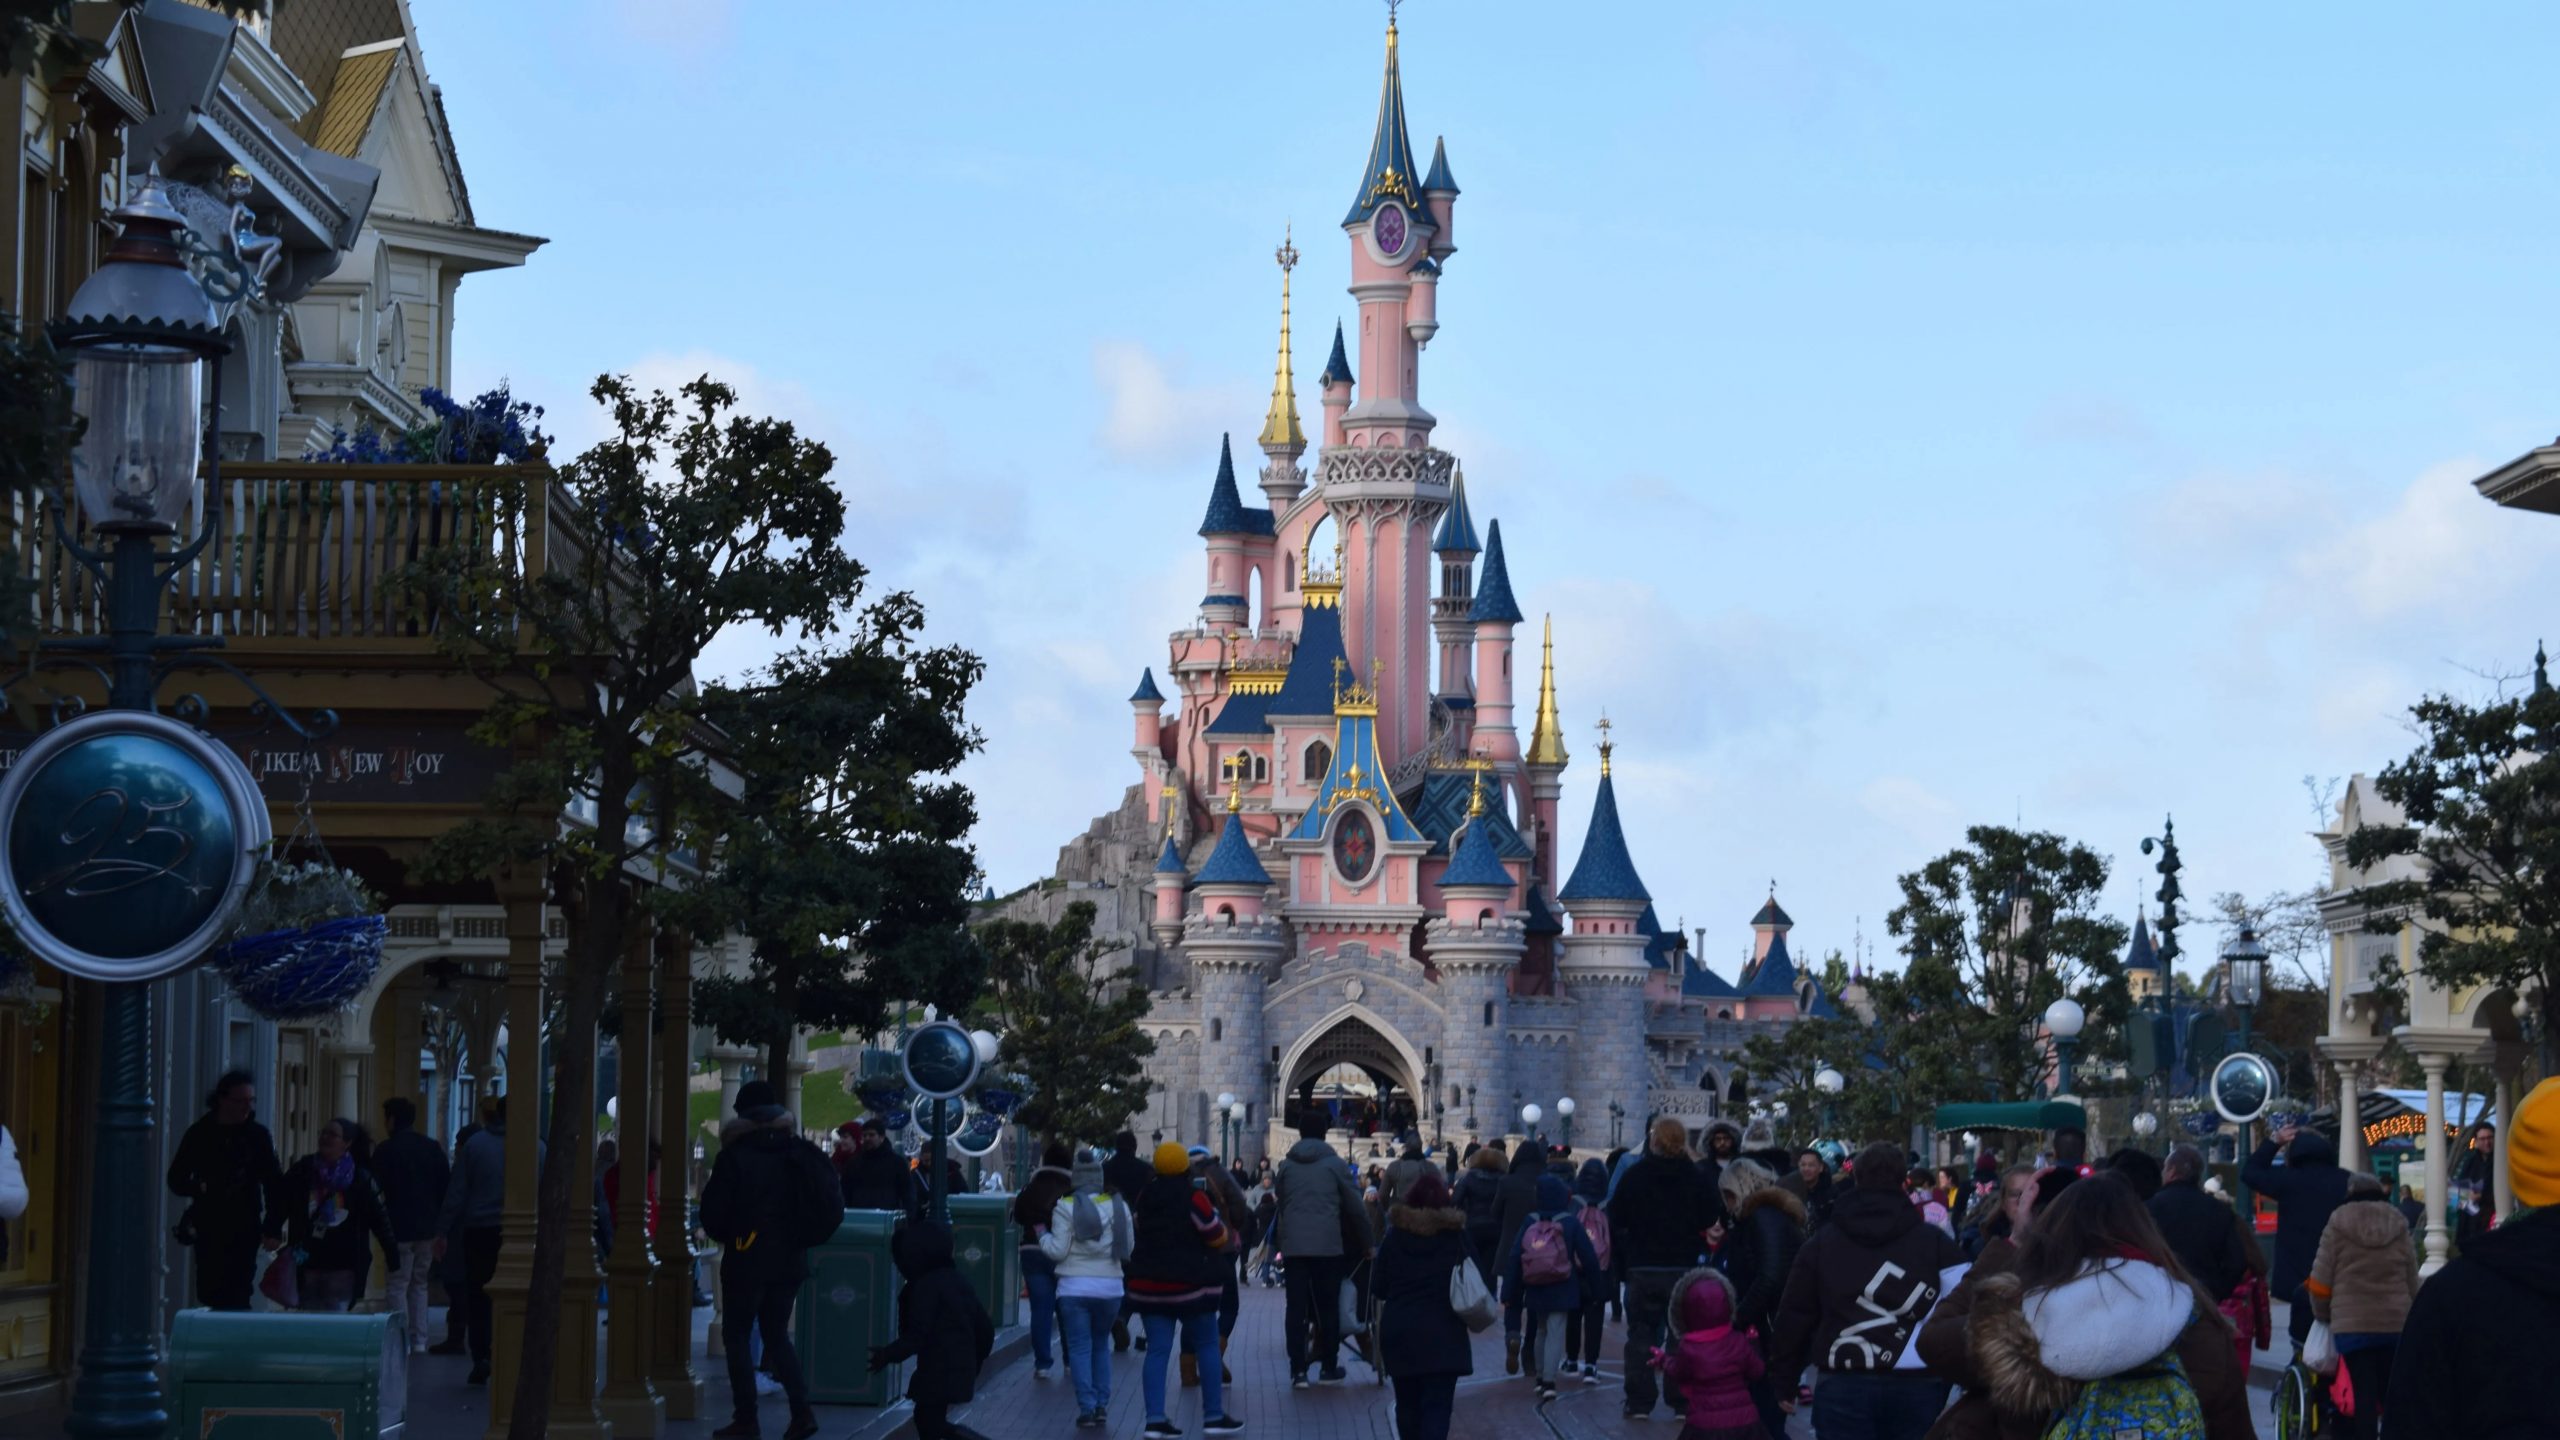 Disneyland, California theme parks push for reopening after 6 months